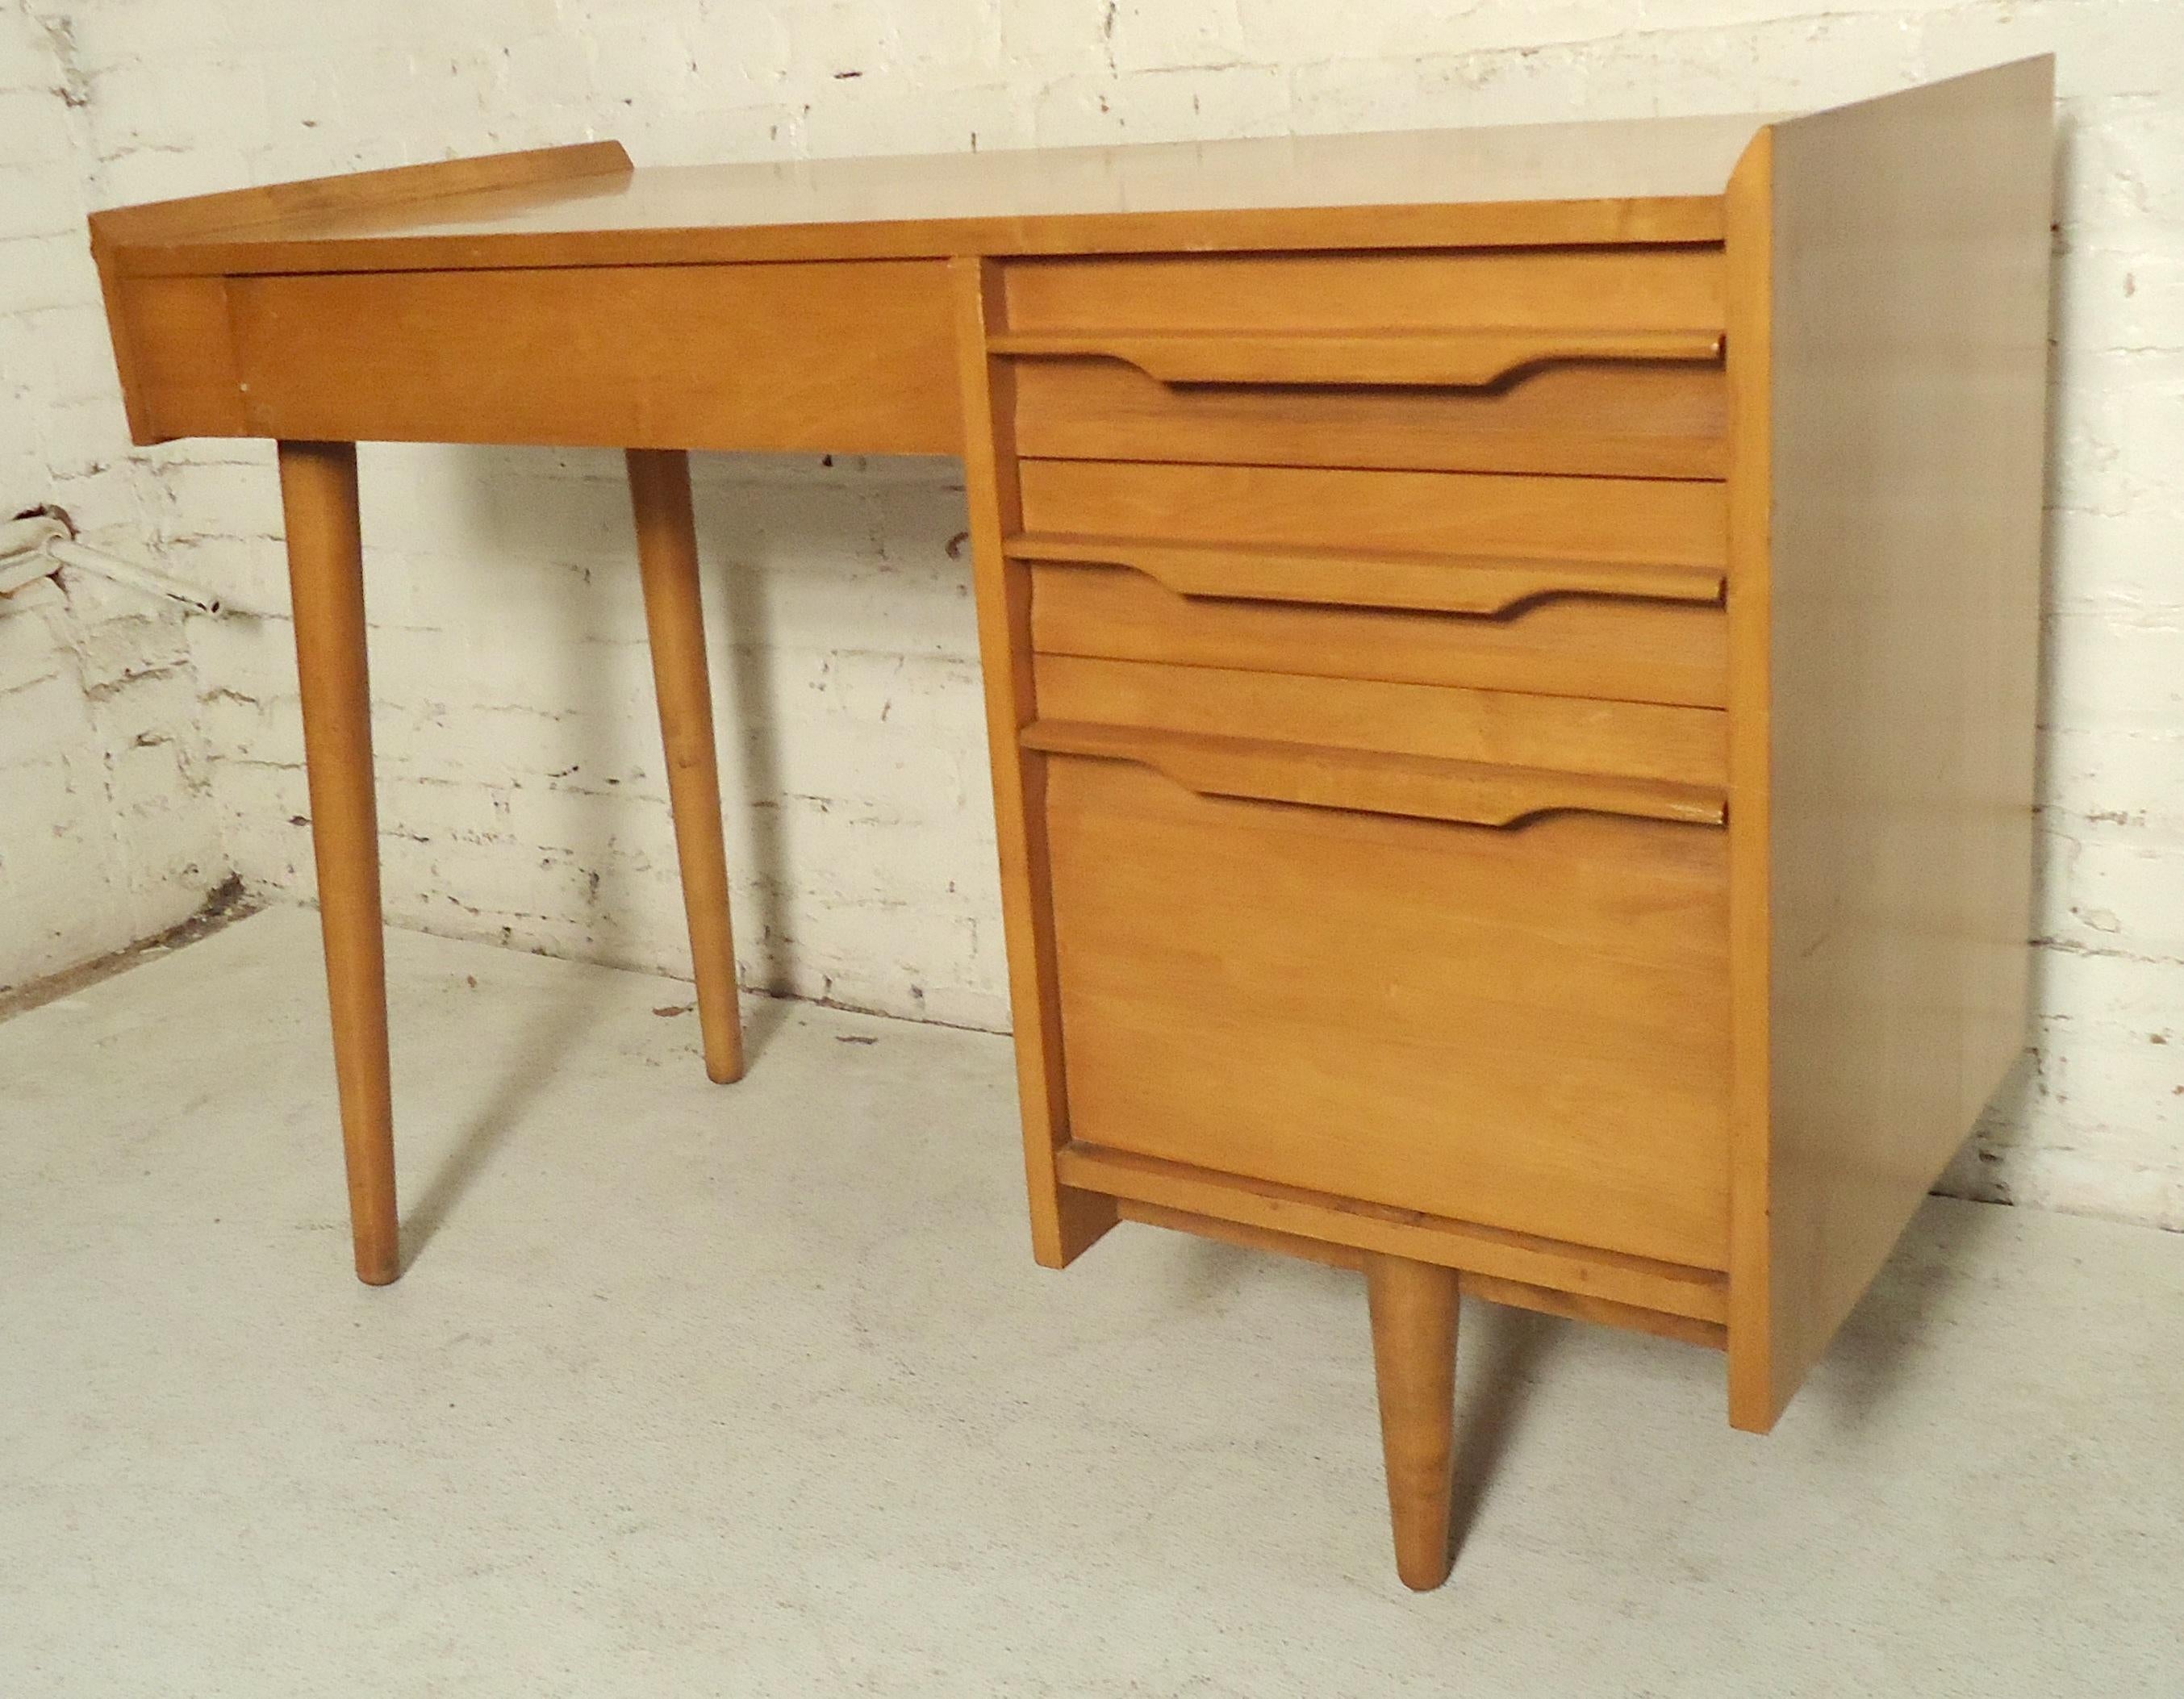 Stylish vintage modern maple desk with flared edges and sculpted handles. Tapered legs, four total drawers.

(Please confirm item location - NY or NJ).
 